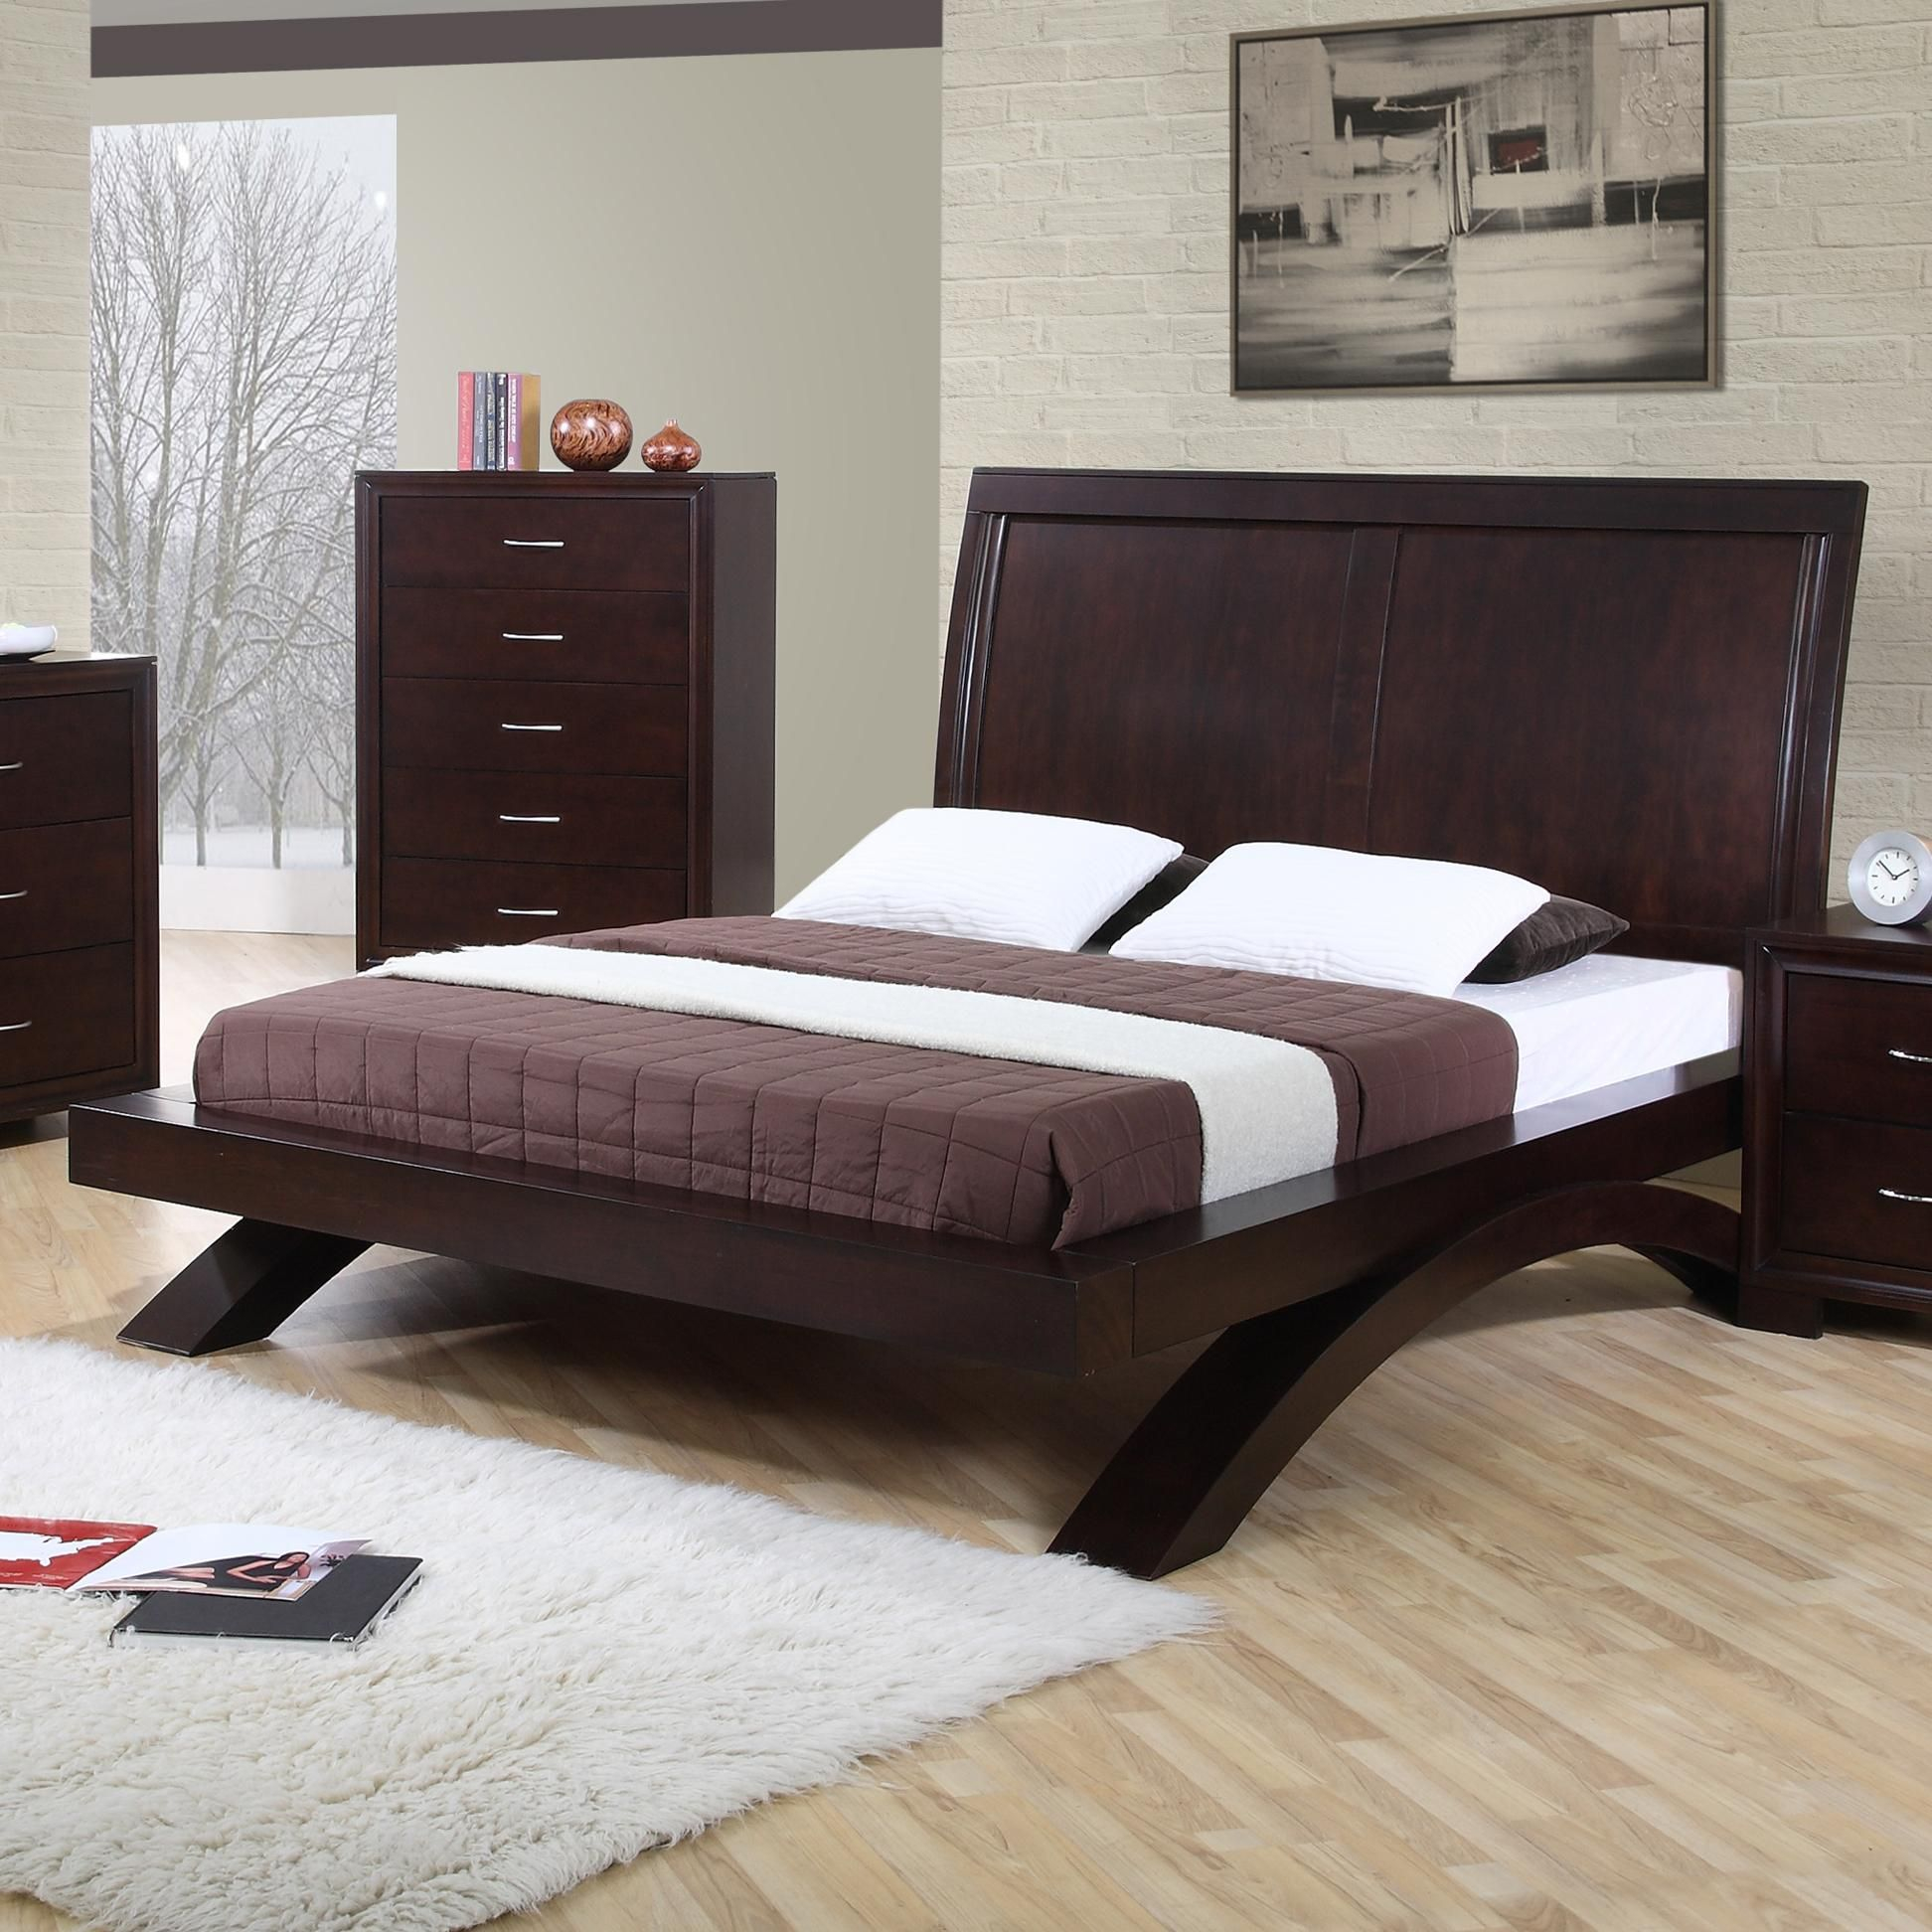 Raven King Contemporary Platform Bed Elements International pertaining to size 1944 X 1944